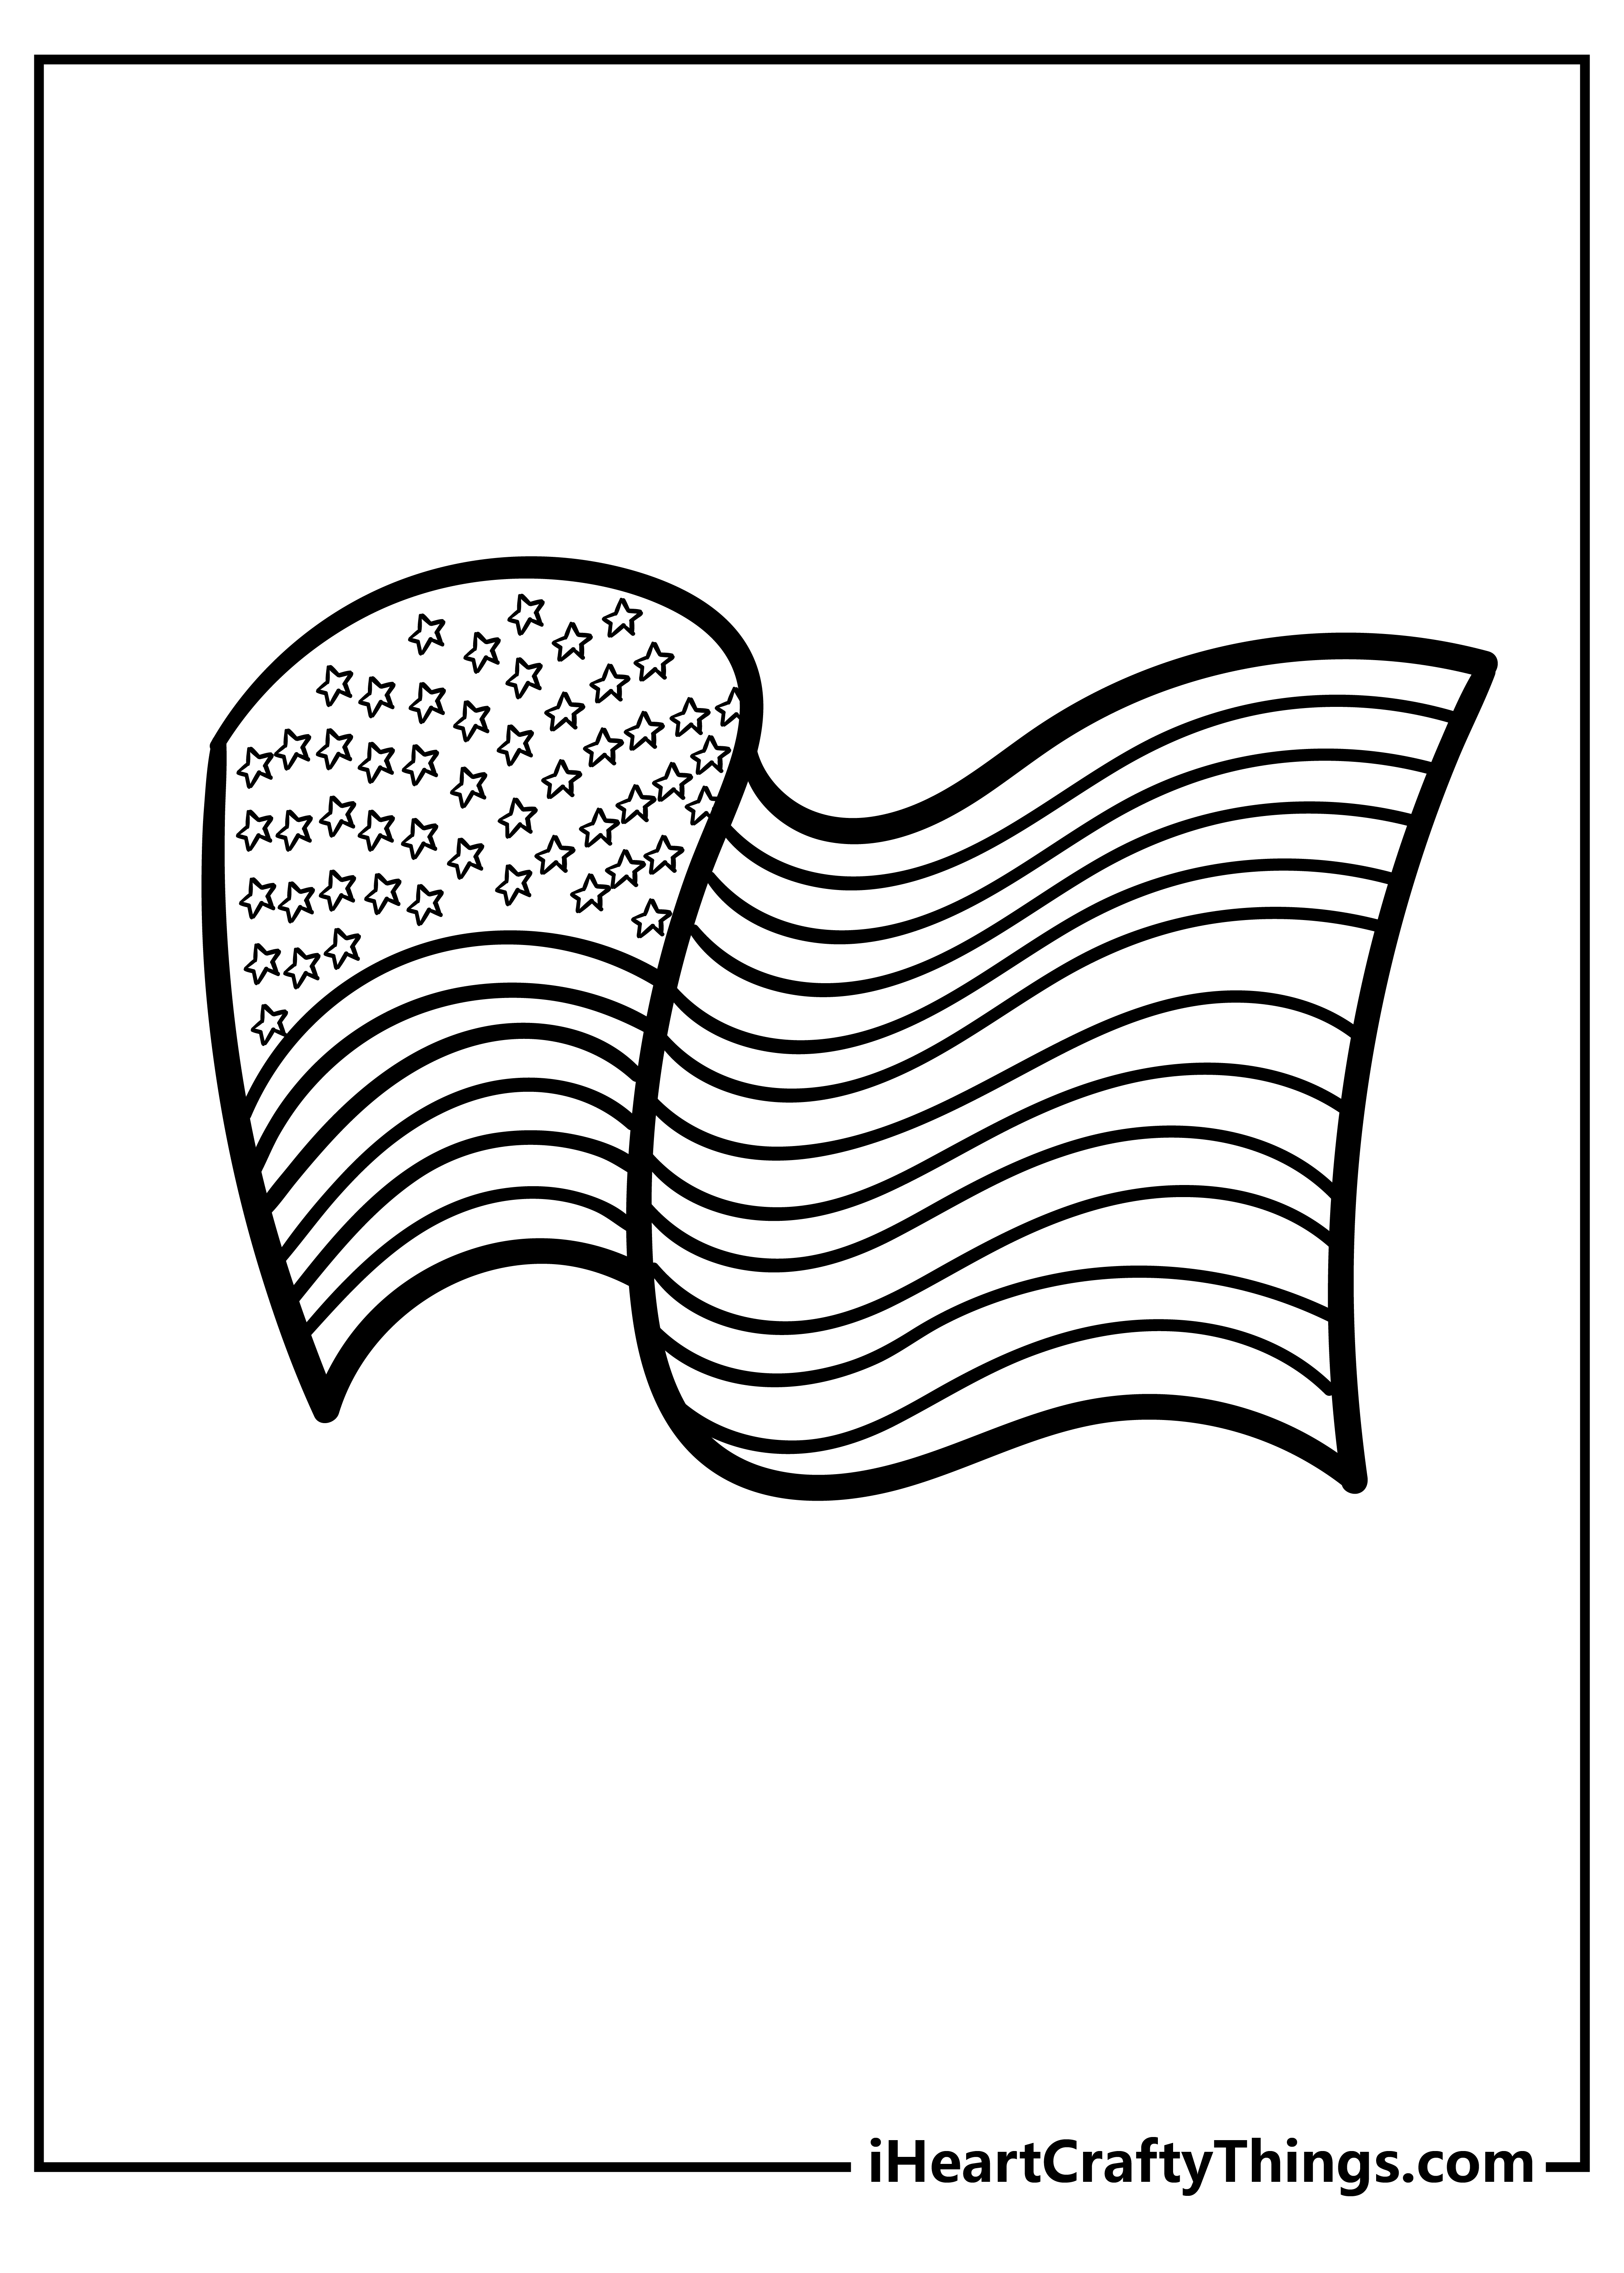 American Flag Coloring Pages free pdf download